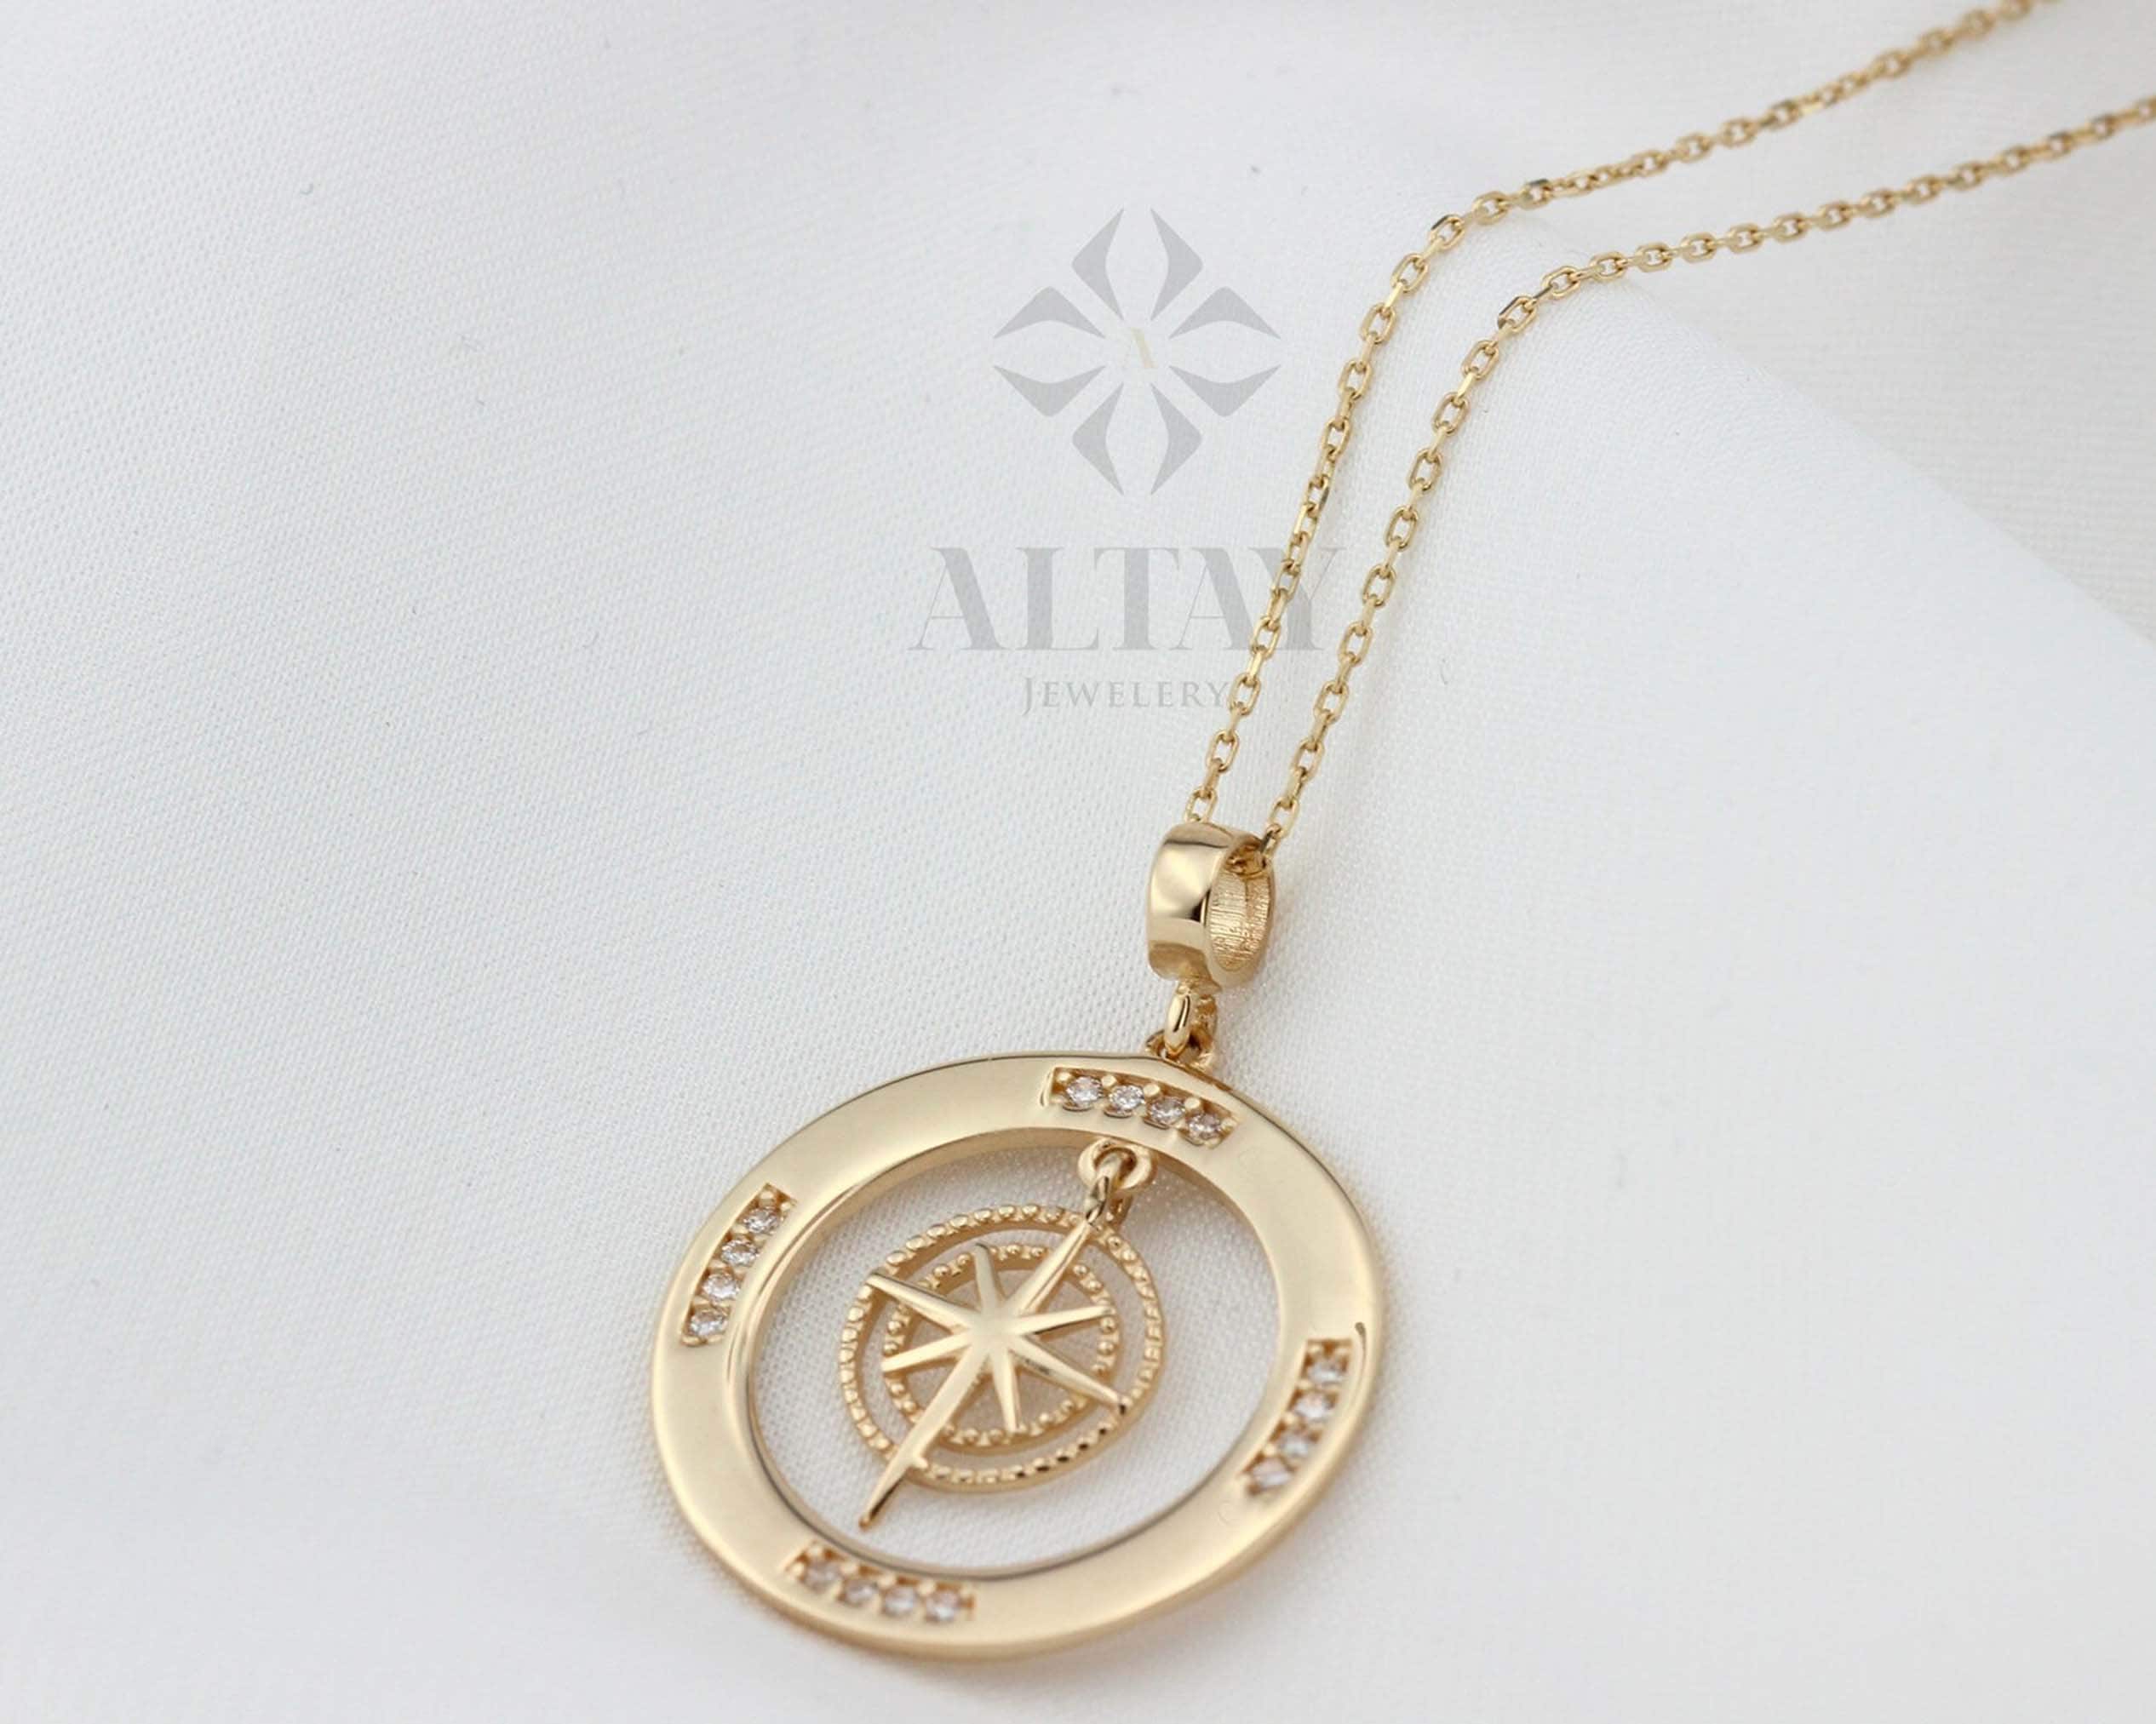 14K Gold Compass Necklace, Polaris Necklace, Travel Necklace, Personalized Compass, Custom North Star Pendant, Celestial Charm Necklace